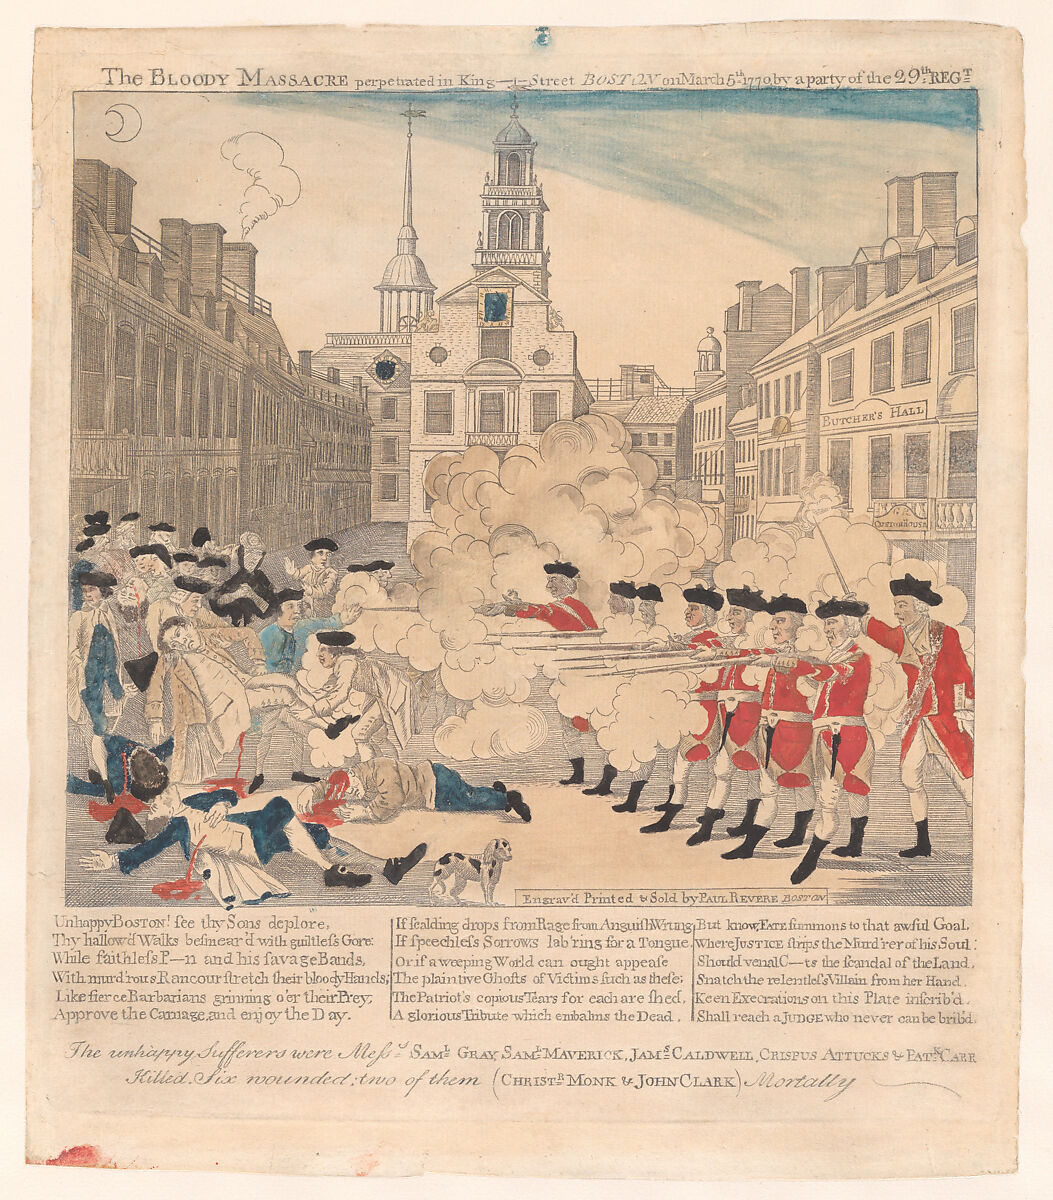 The Boston Massacre, Paul Revere Jr., Hand-colored engraving and etching